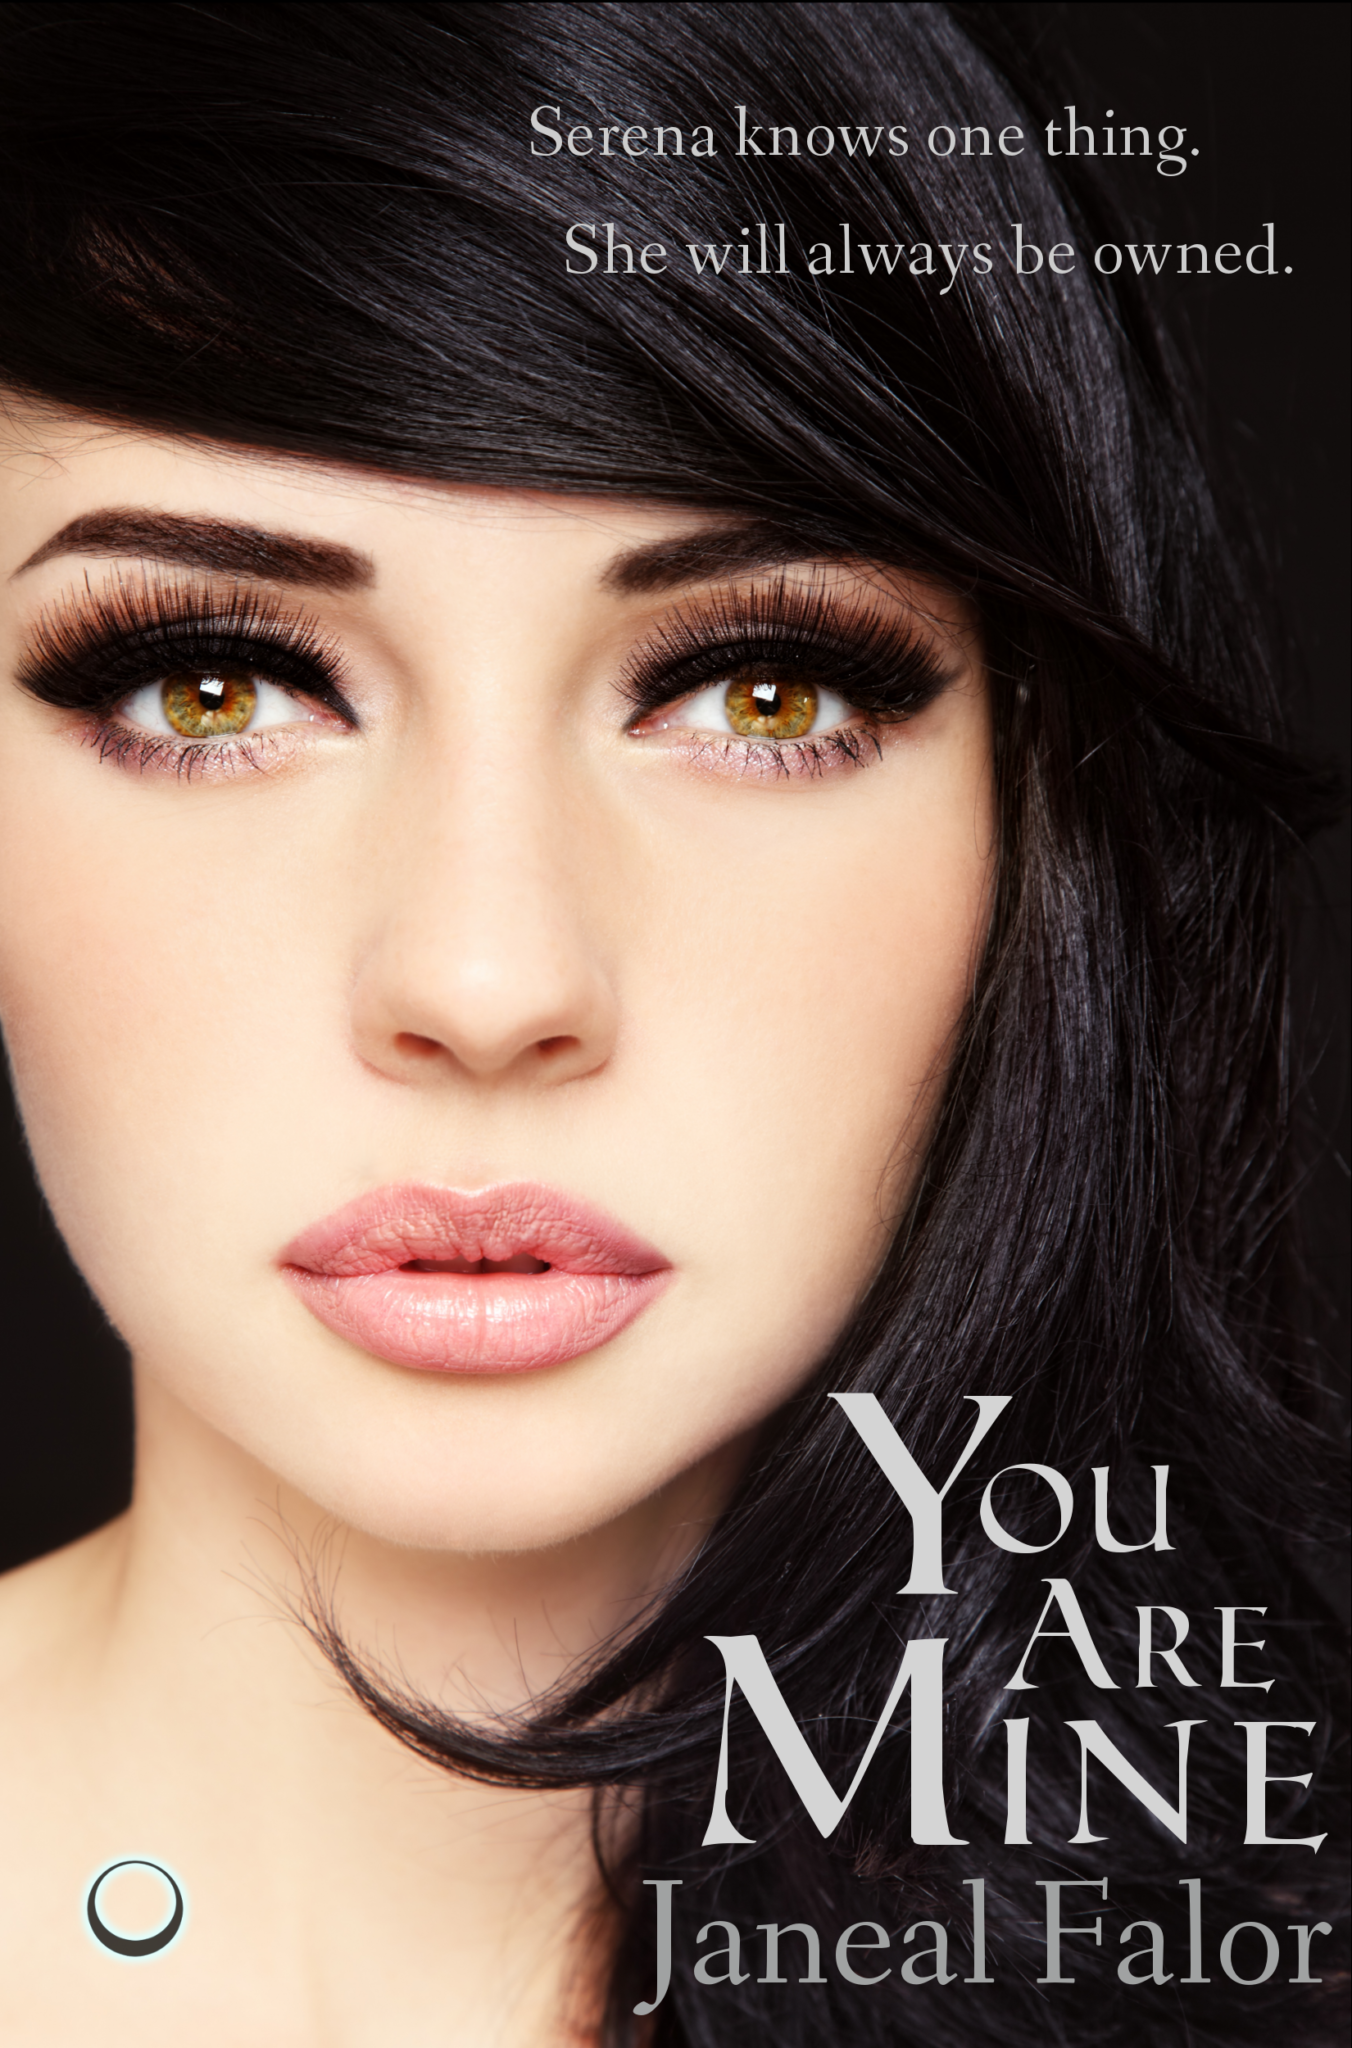 FREE: You Are Mine by Janeal Falor